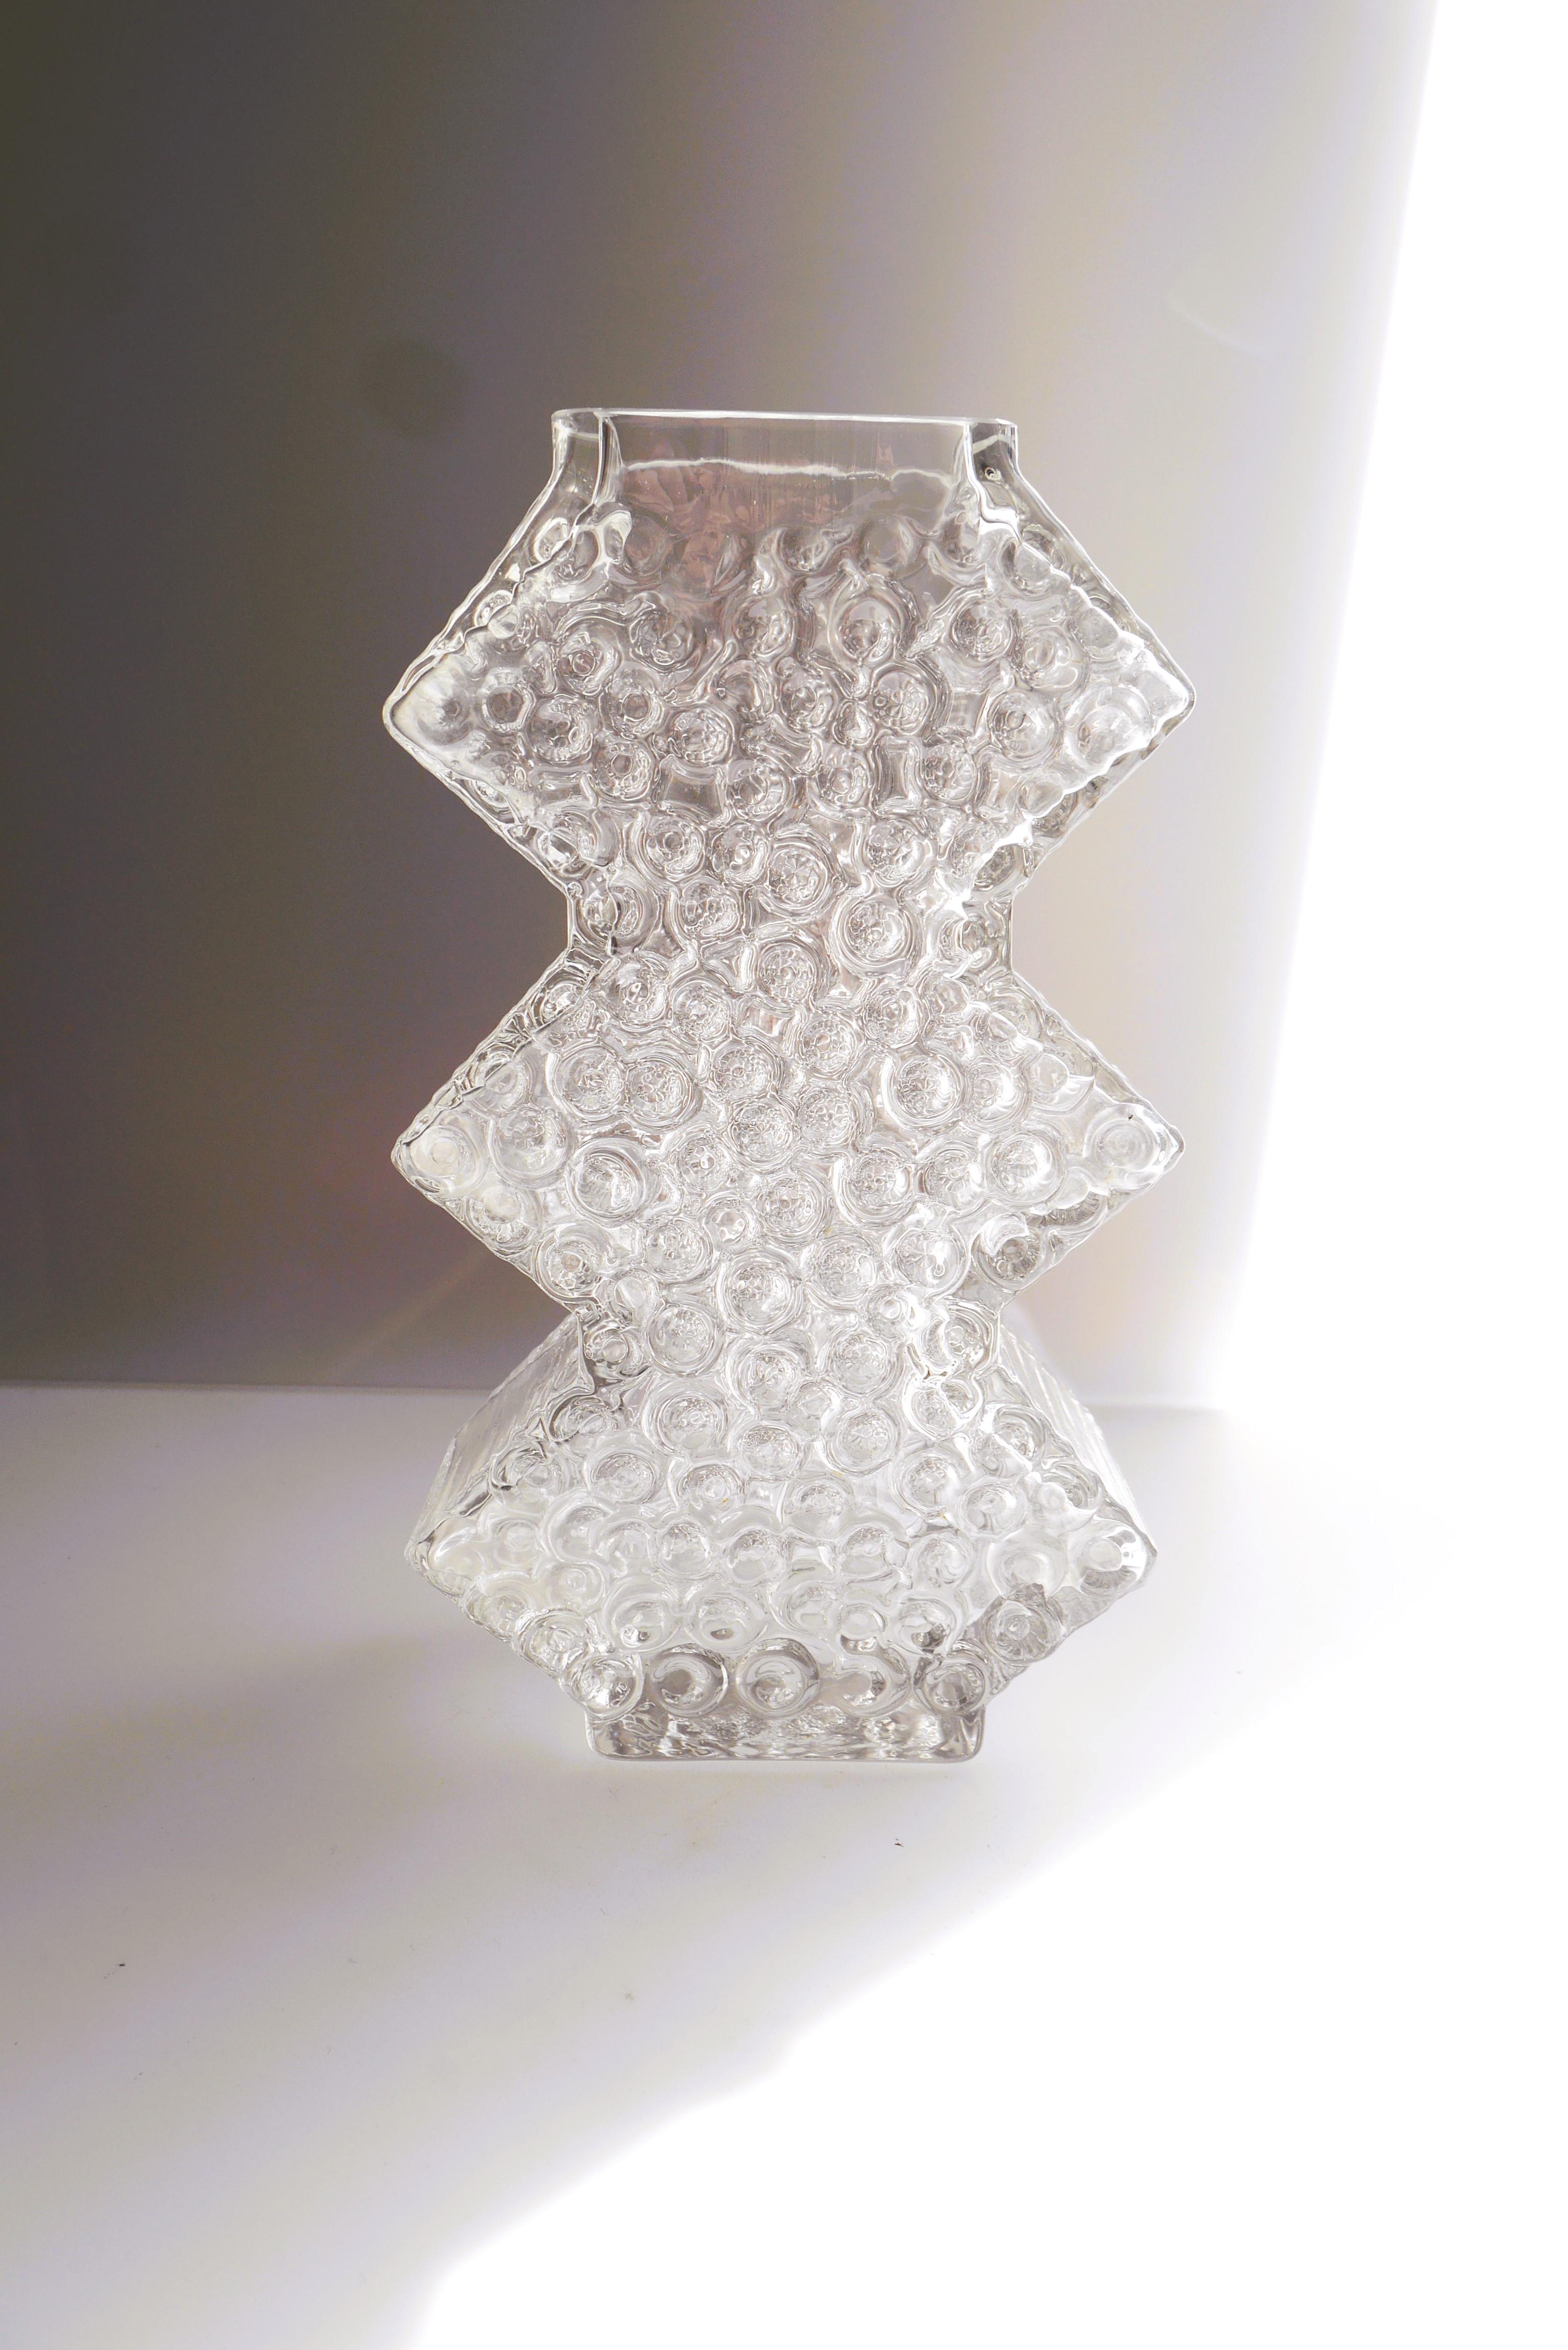 A fantastic ahndmade glass vase, with unusual shape made by the talented Josef Schott for Smålandshyttan, Sweden. It is the details and especially the shape that makes this vase so special. It reminds of a christmas tree with intricate small